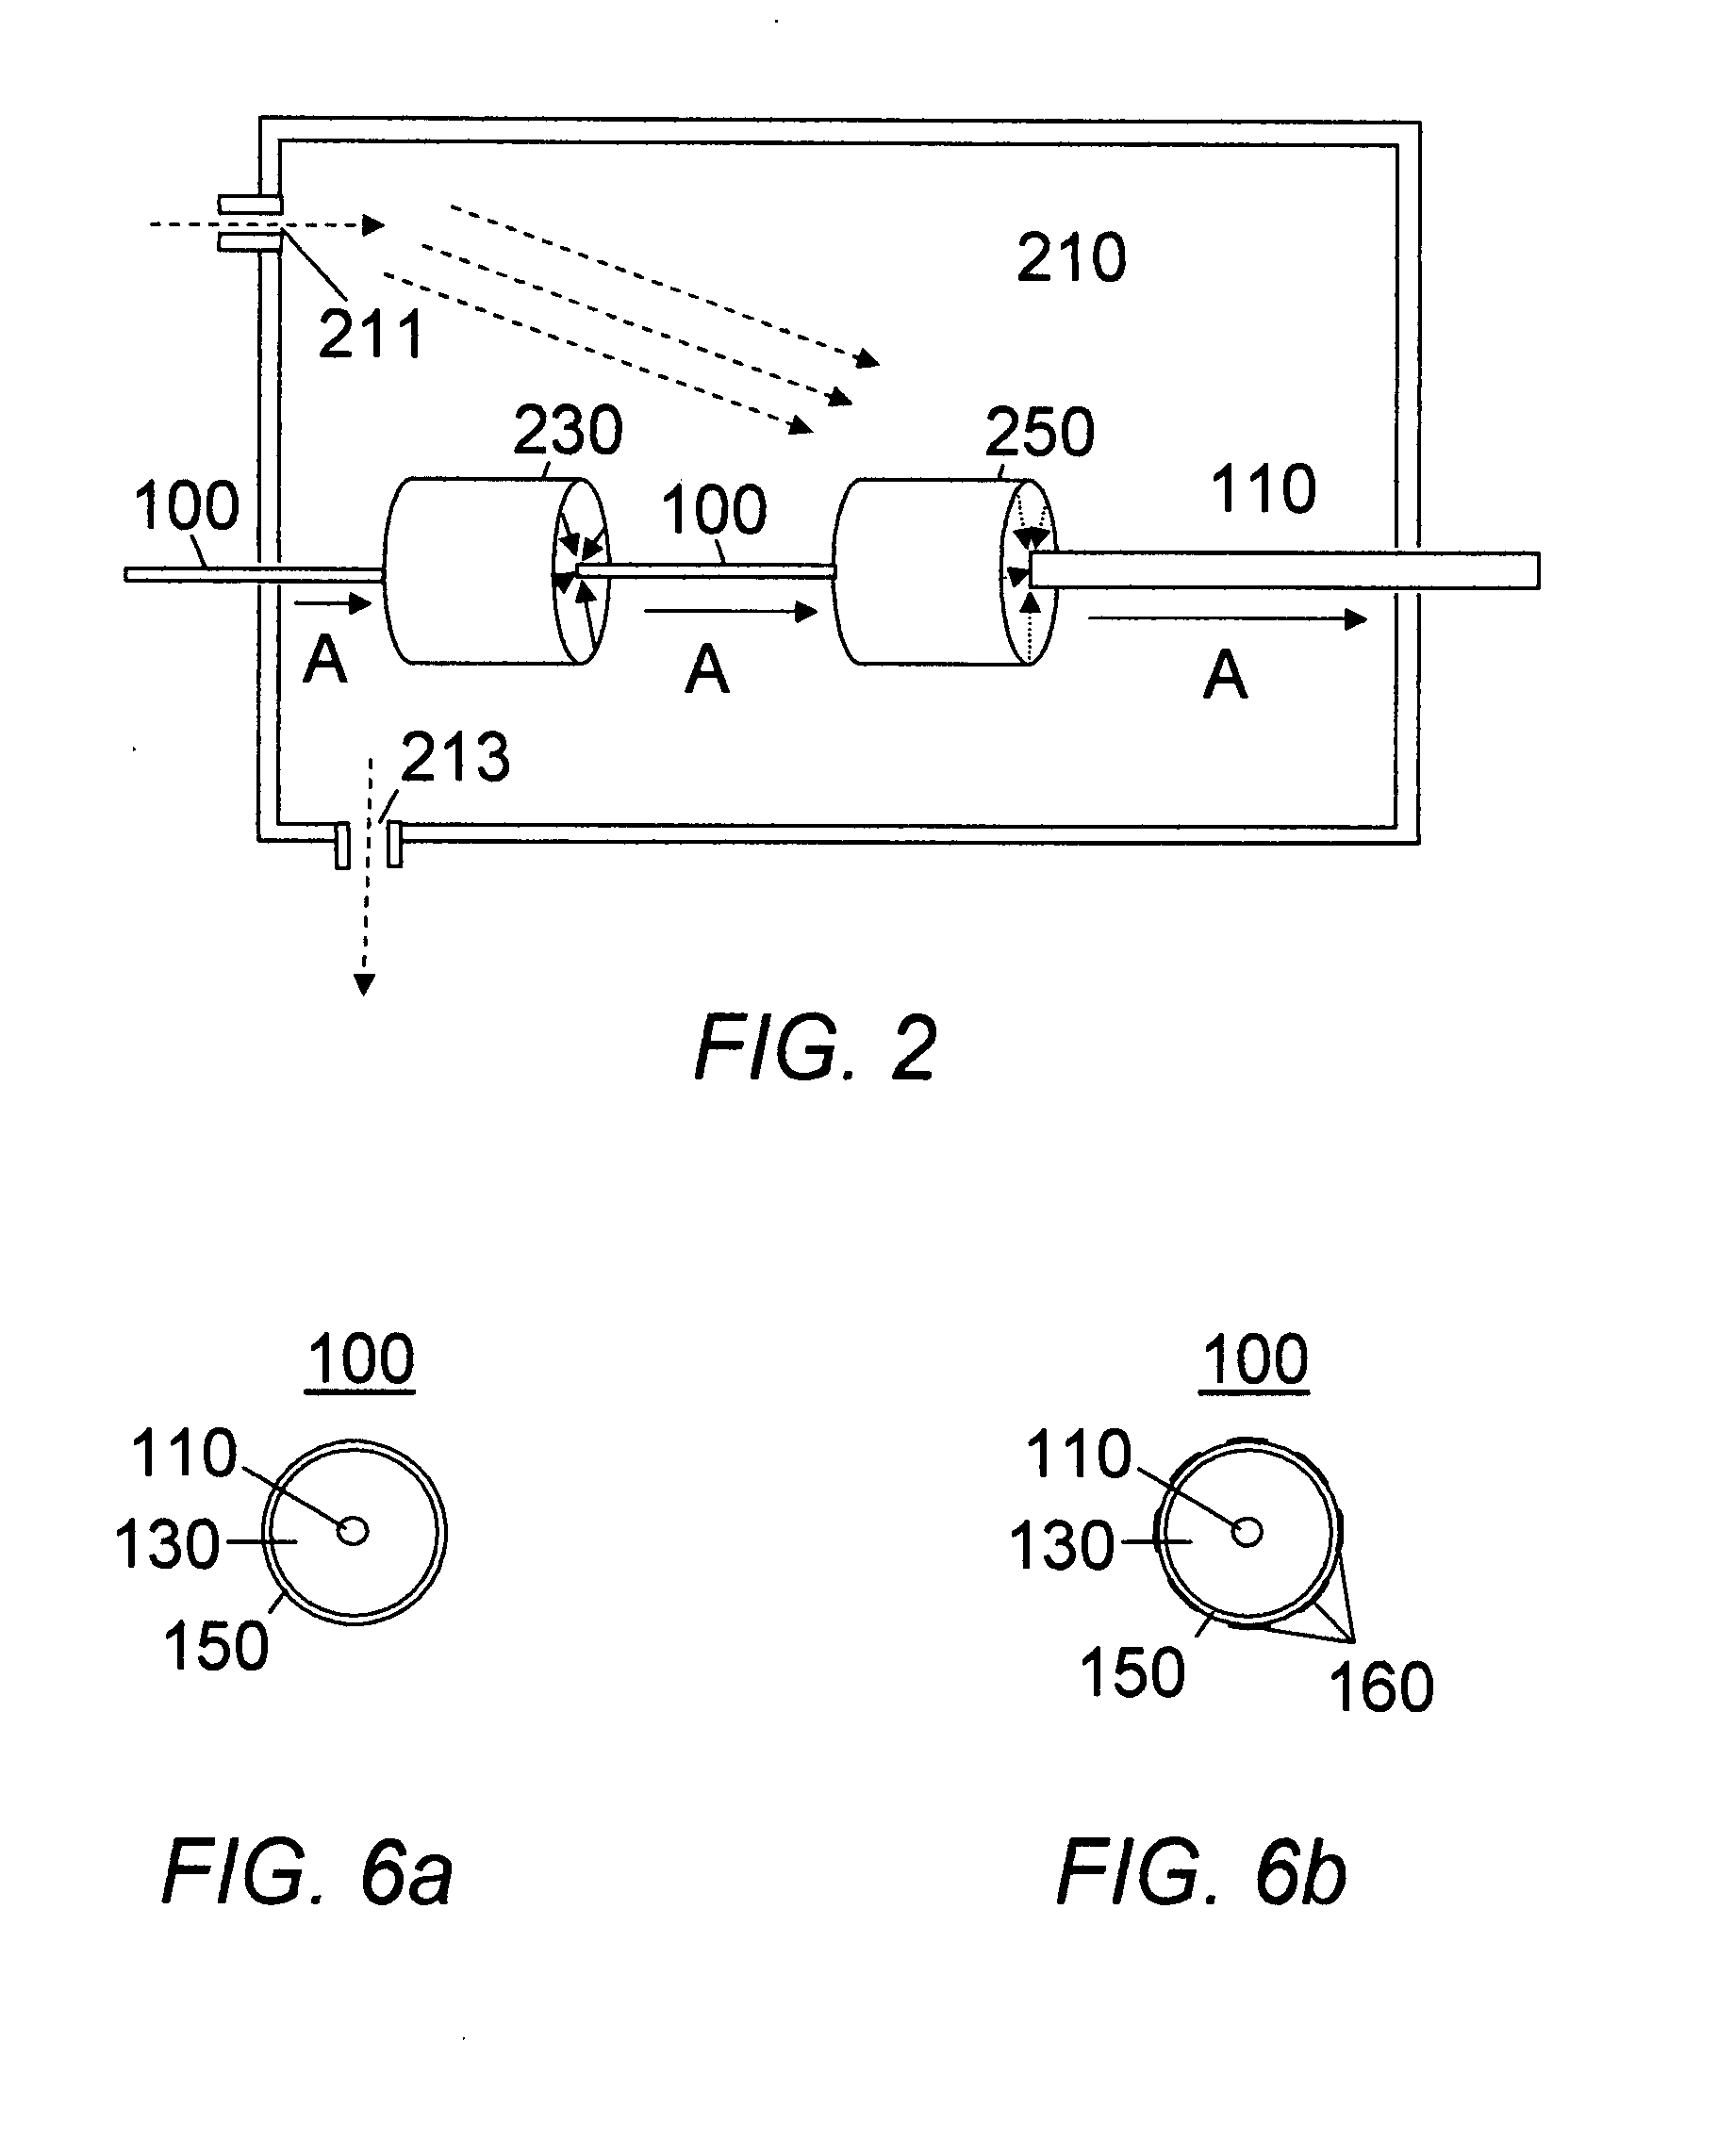 Multi-layer cable design and method of manufacture